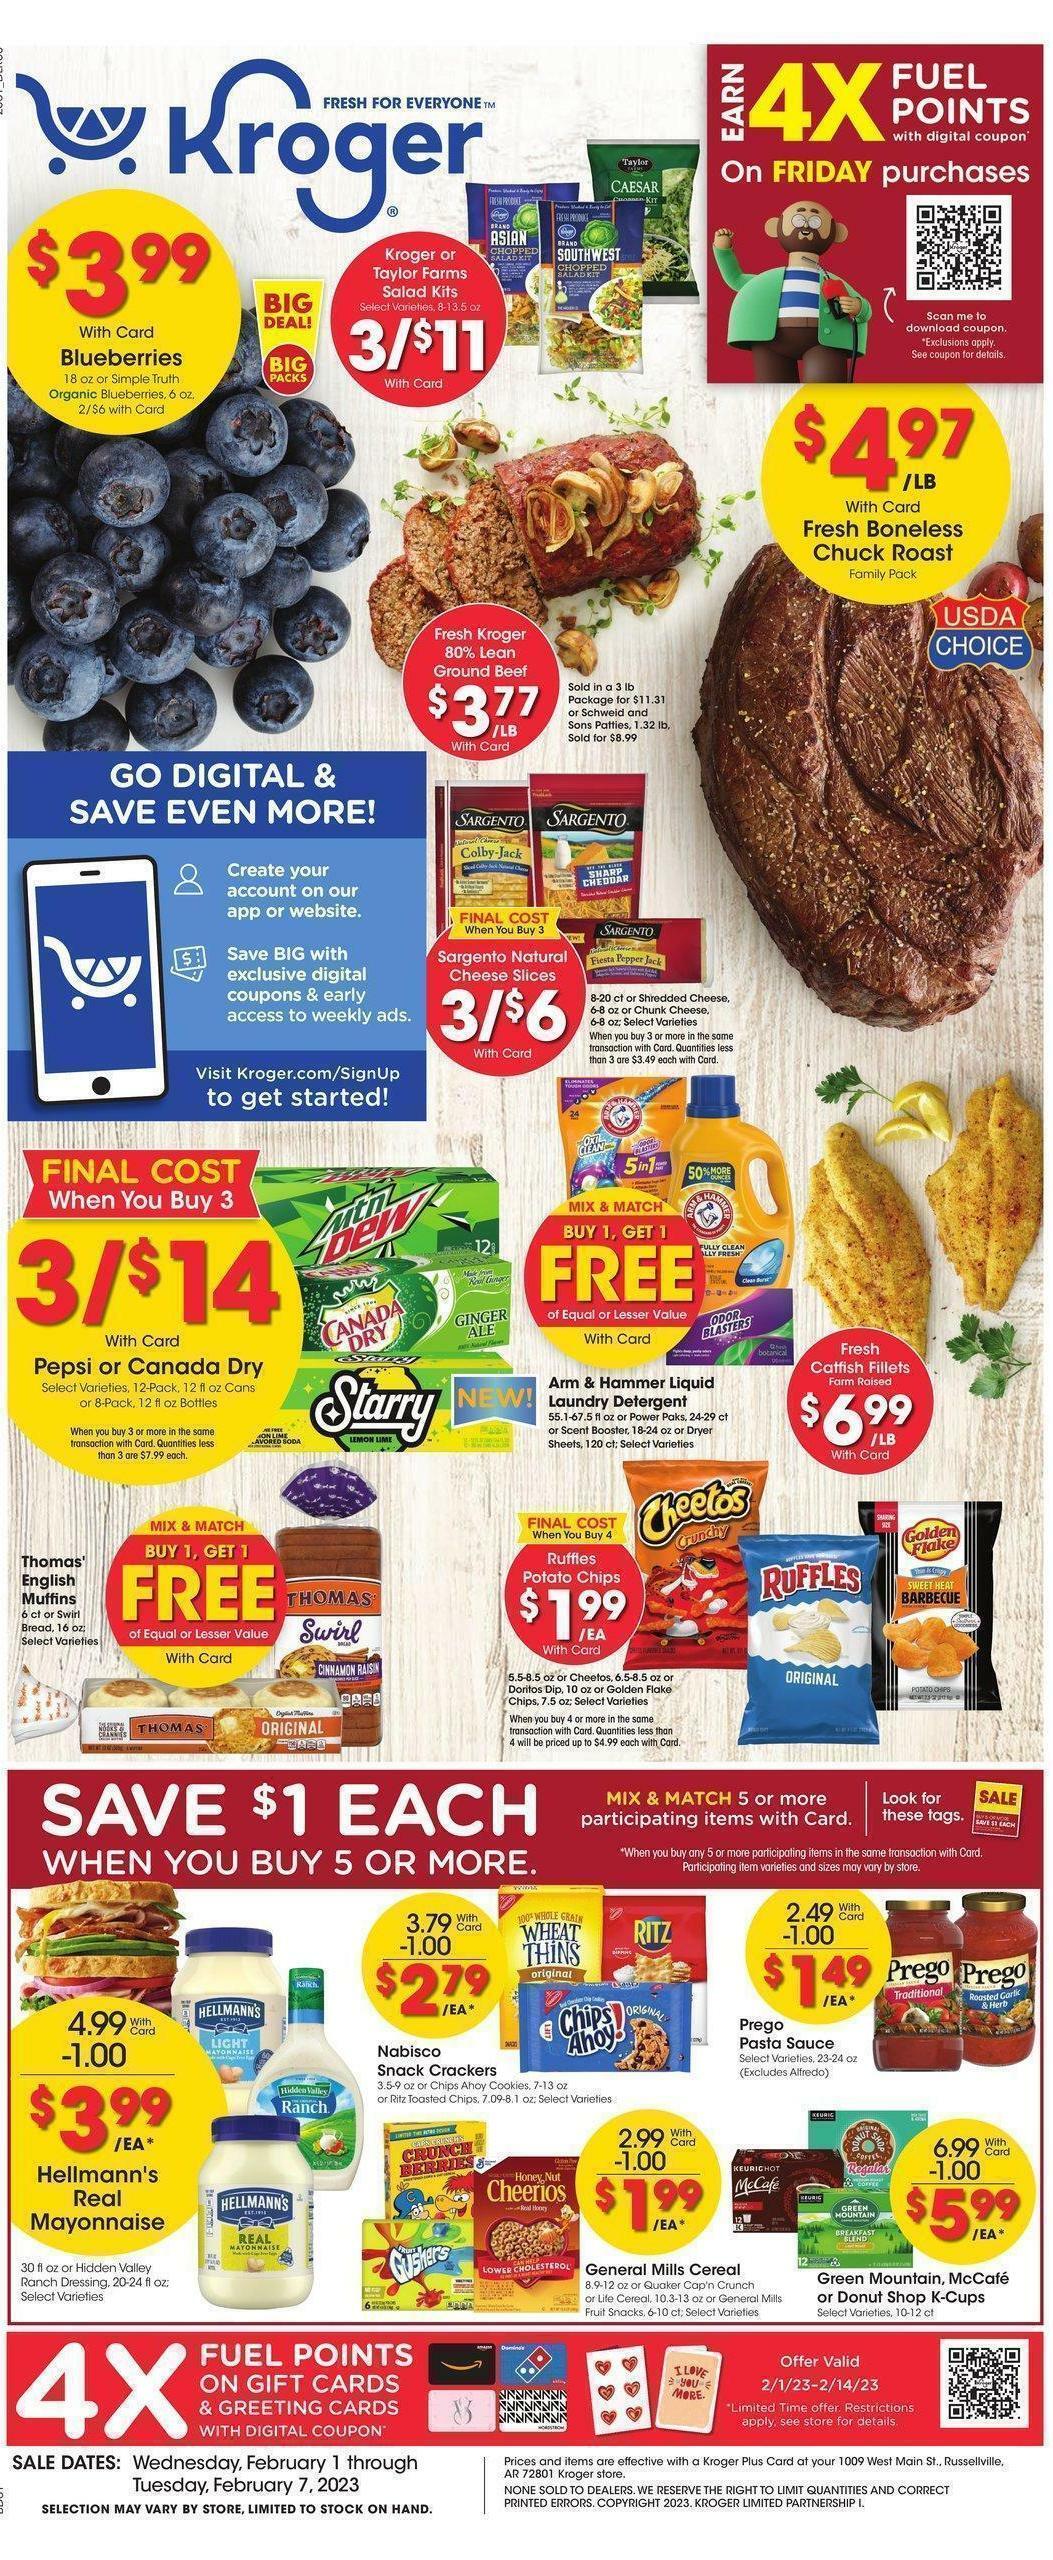 Kroger Weekly Ad from February 1